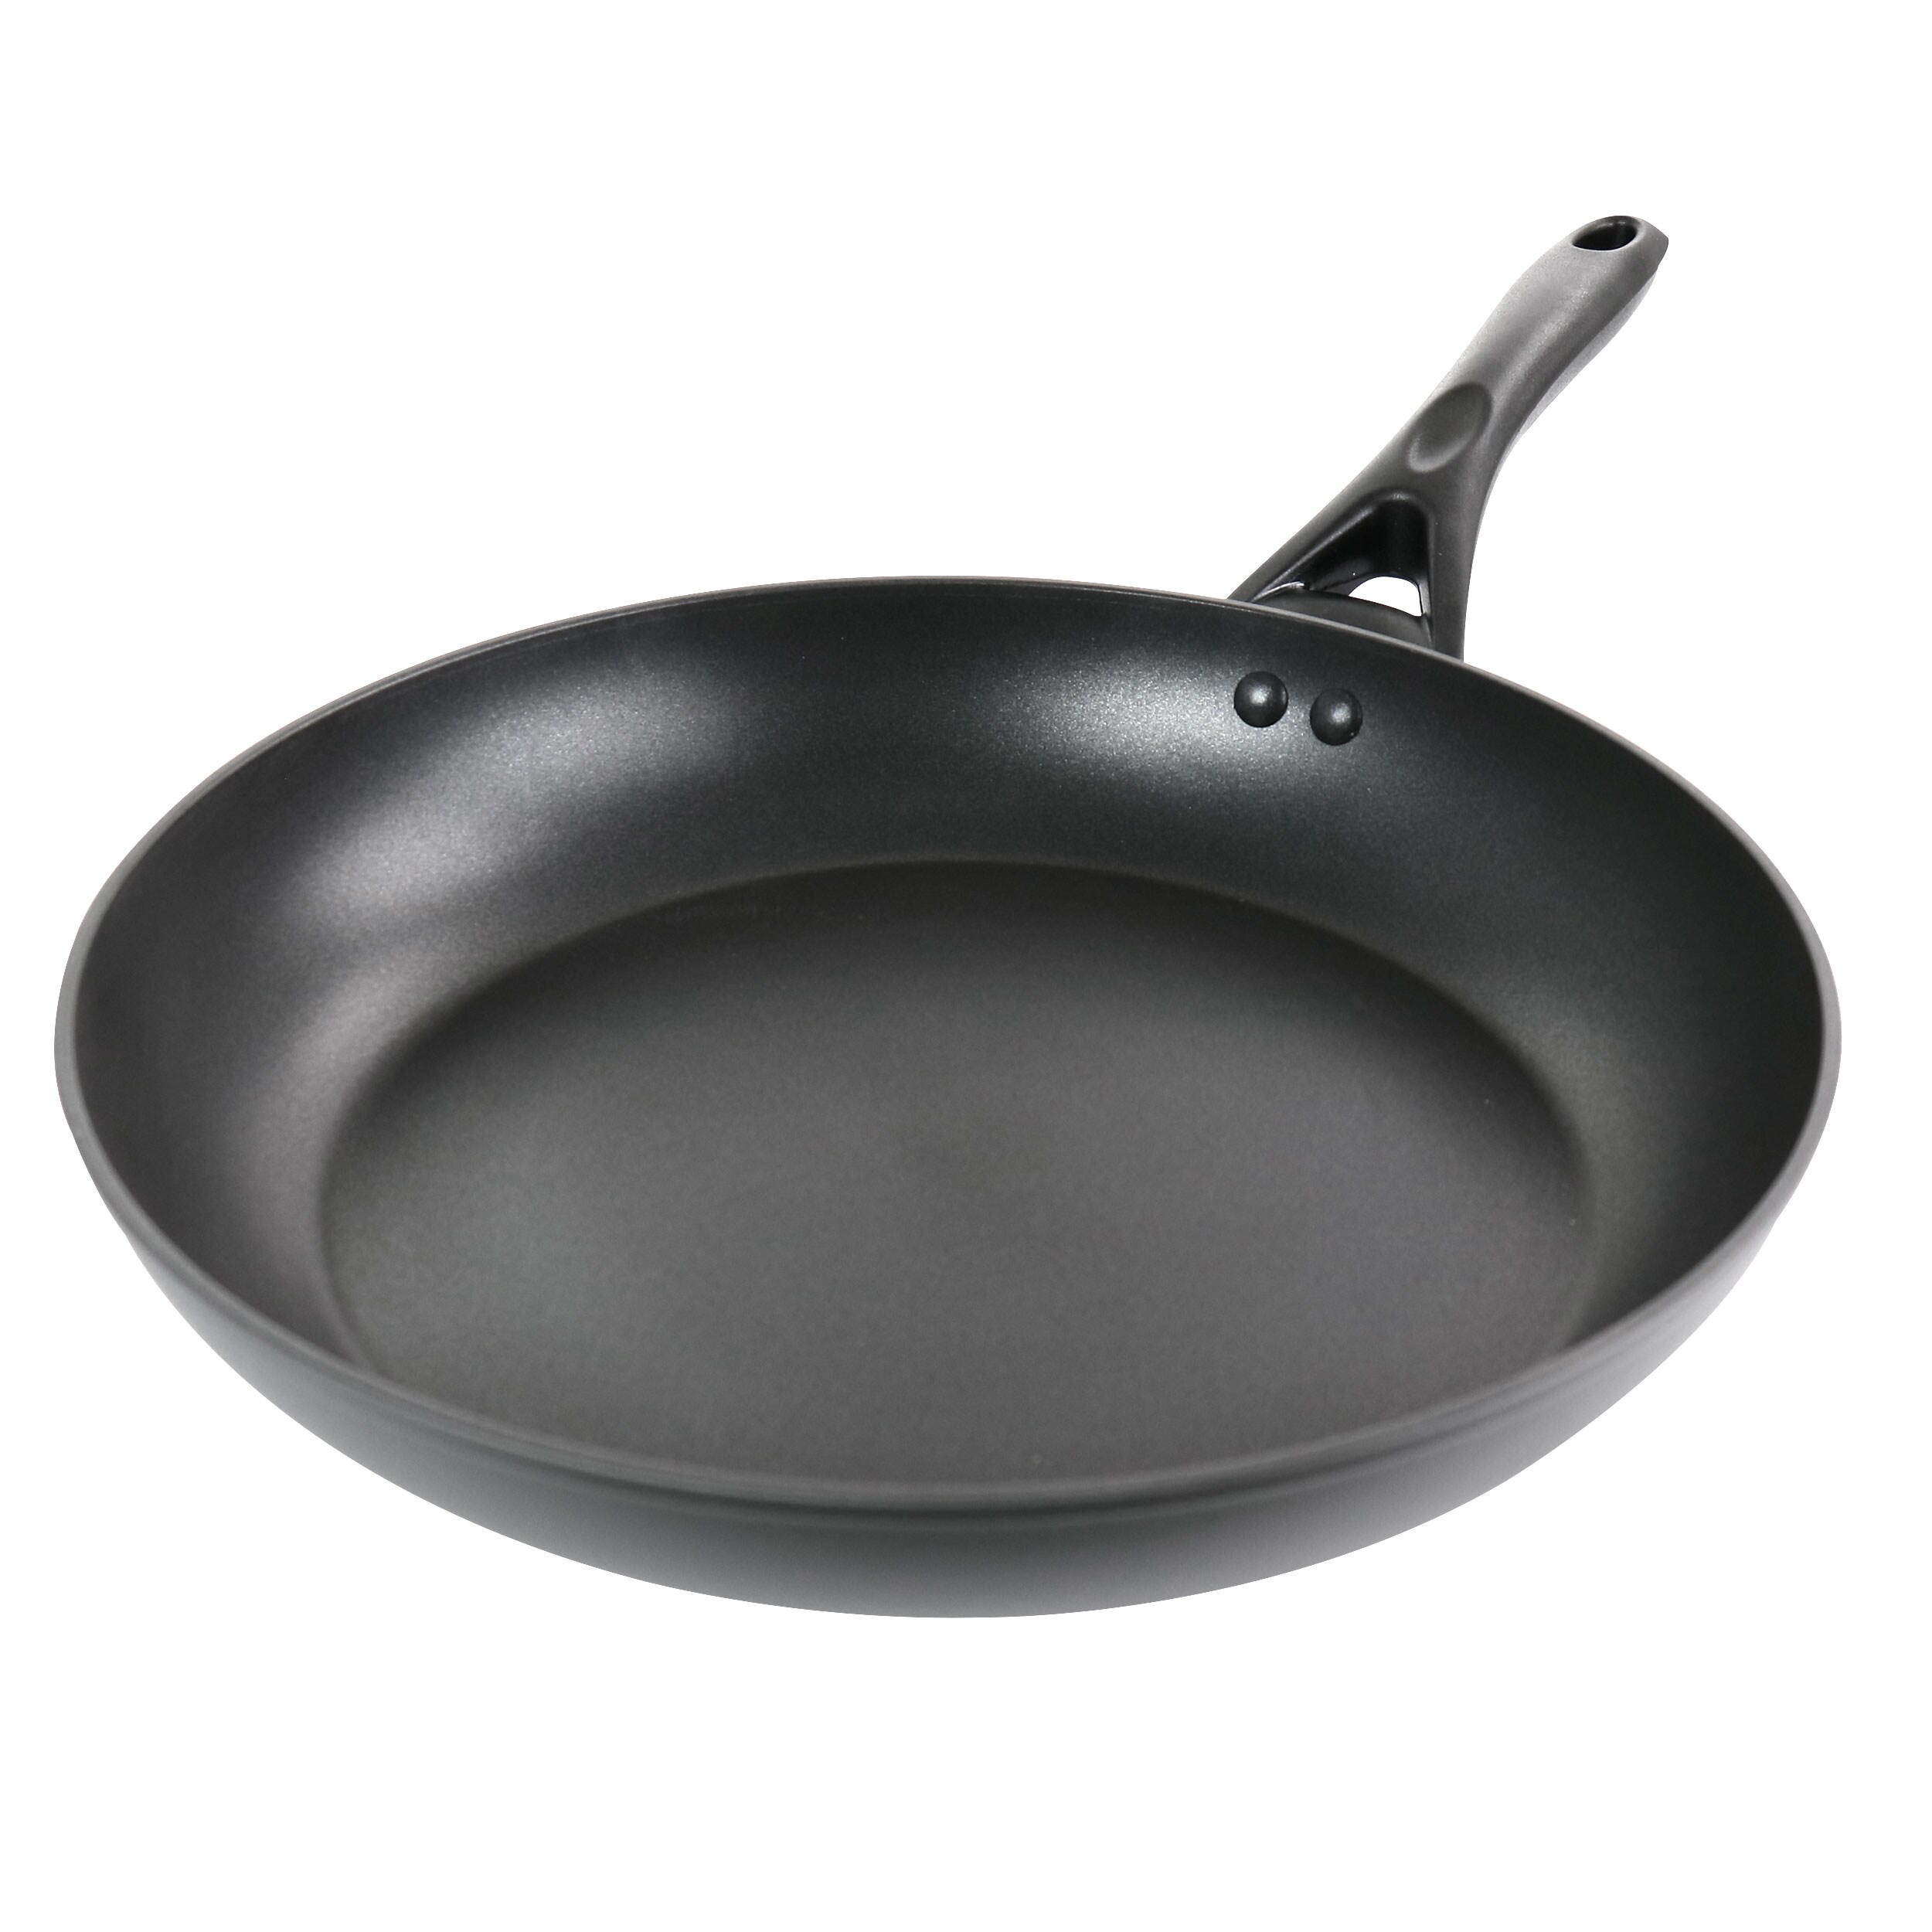 New Royal Prestige Electric Skillet 10.5in Stainless Steel